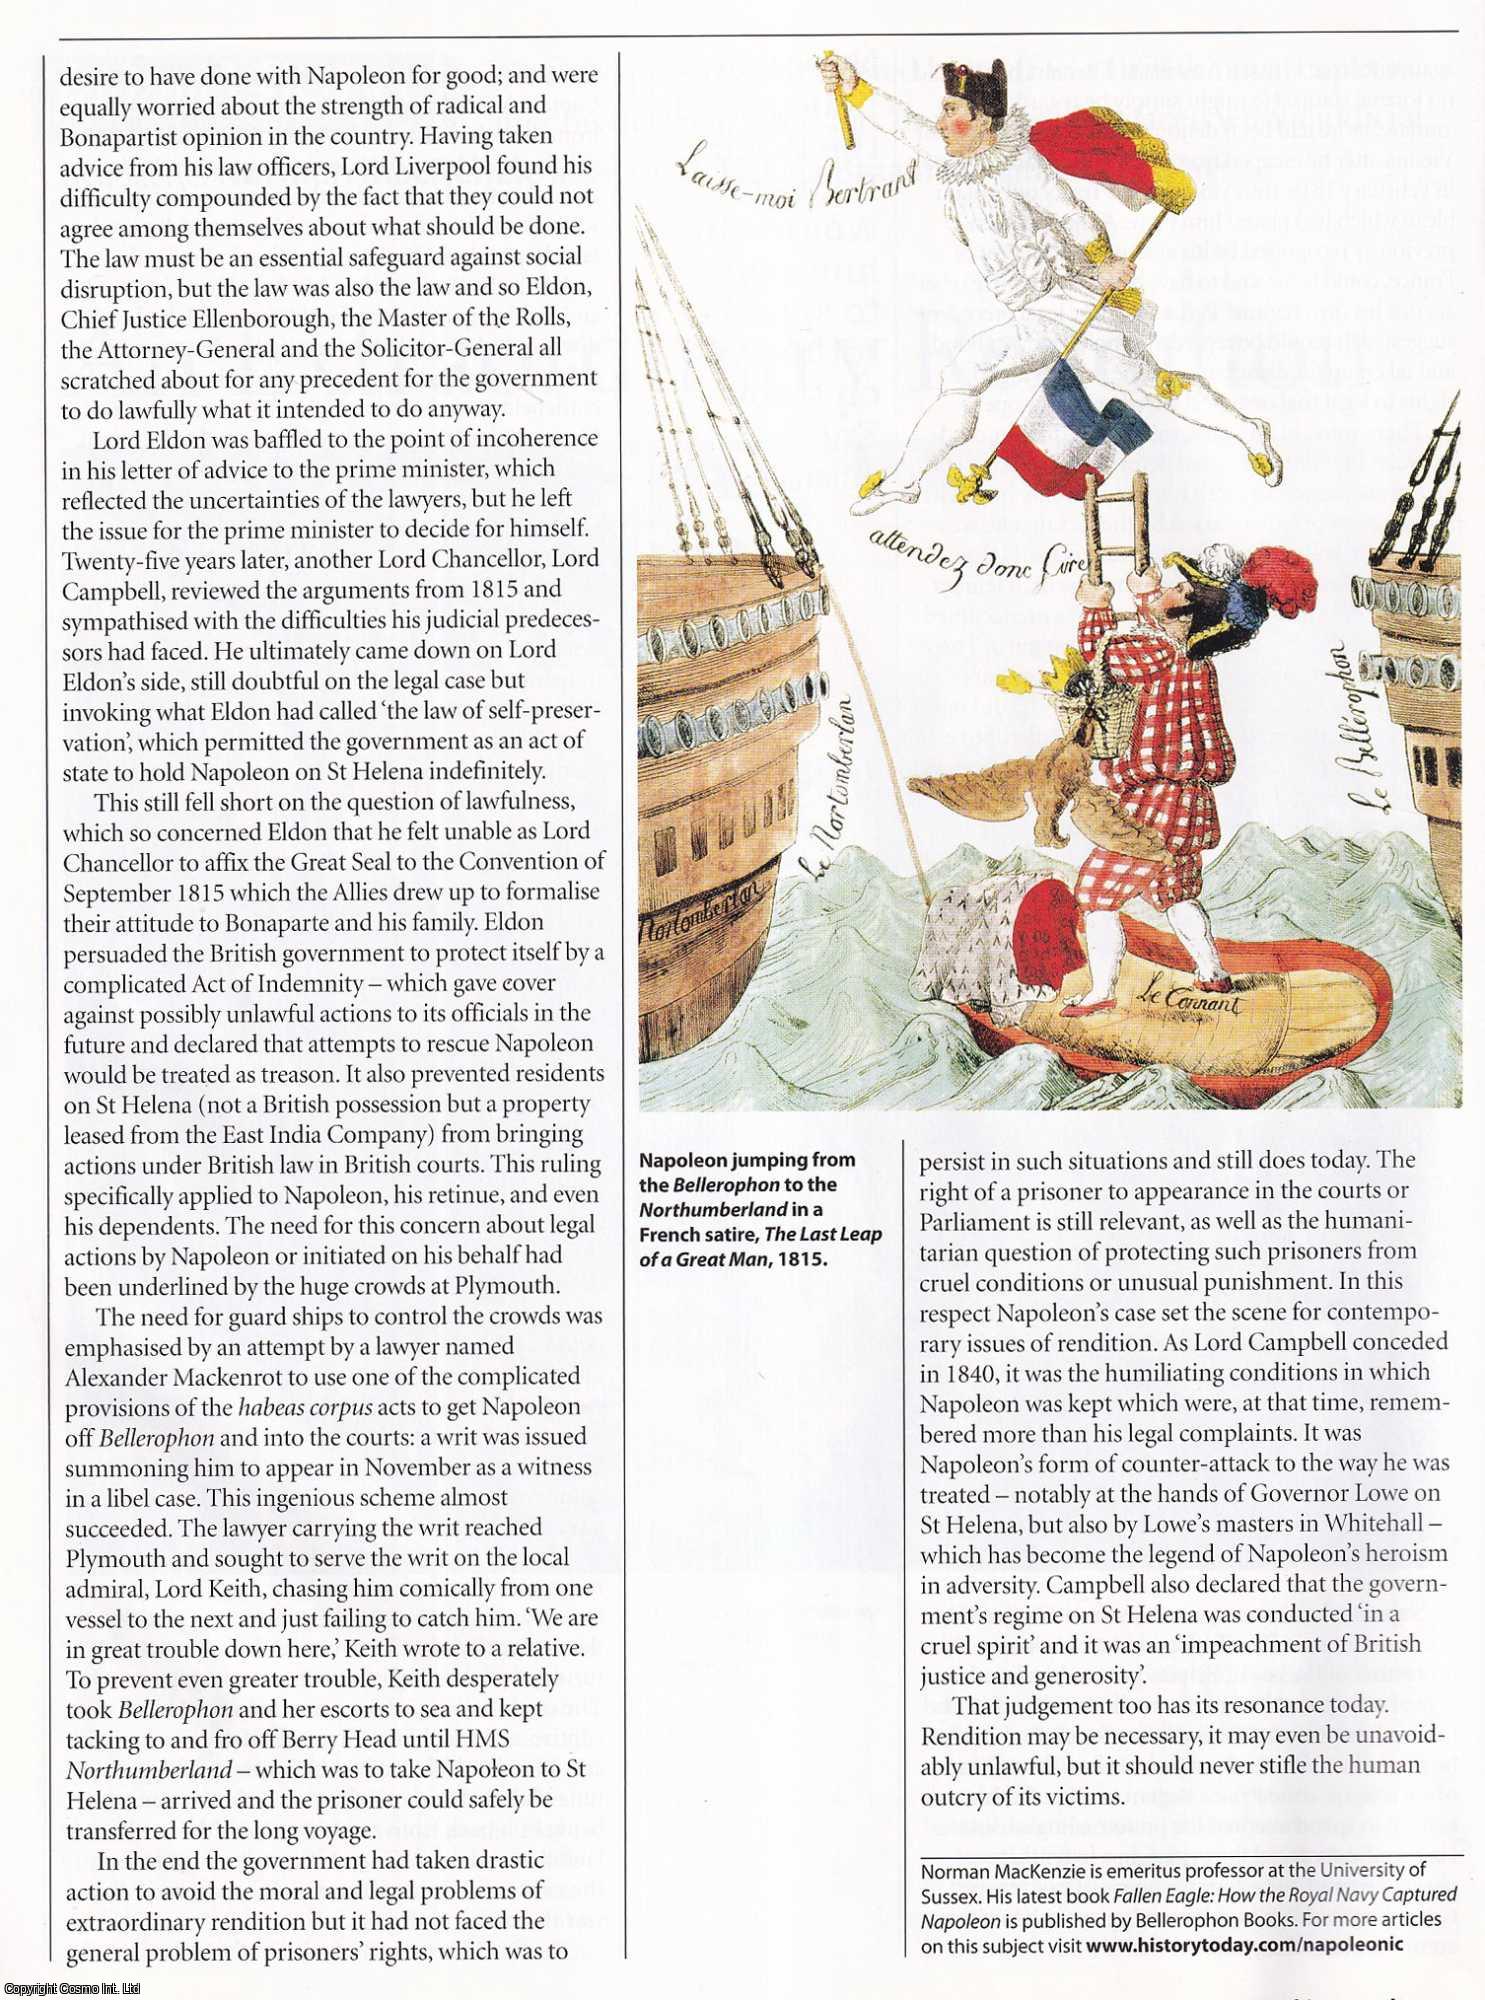 Norman MacKenzie - An 'Extraordinary Rendition': Exiling Napoleon after his defeat at Waterloo, was St. Helena Britain's Guantanamo Bay? An original article from History Today magazine, 2010.